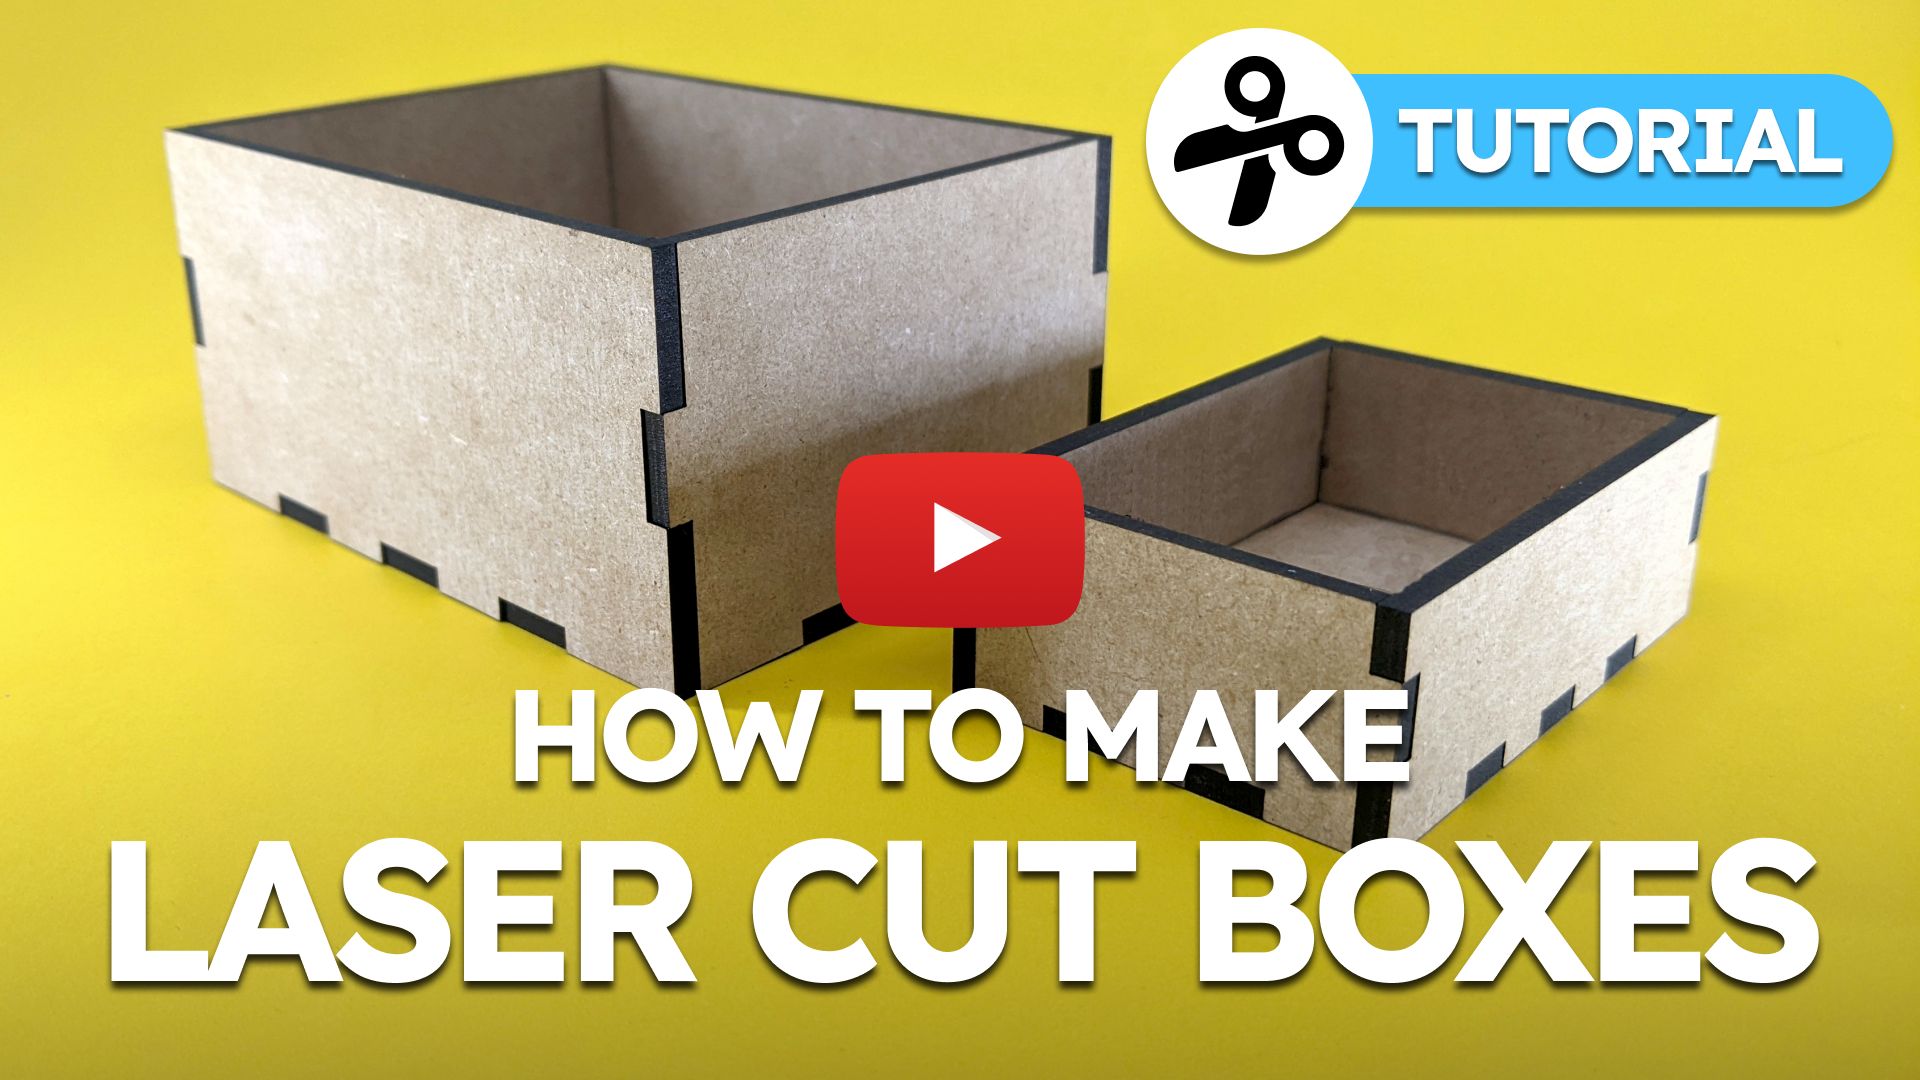 How To Make Laser Cut Boxes.jpeg